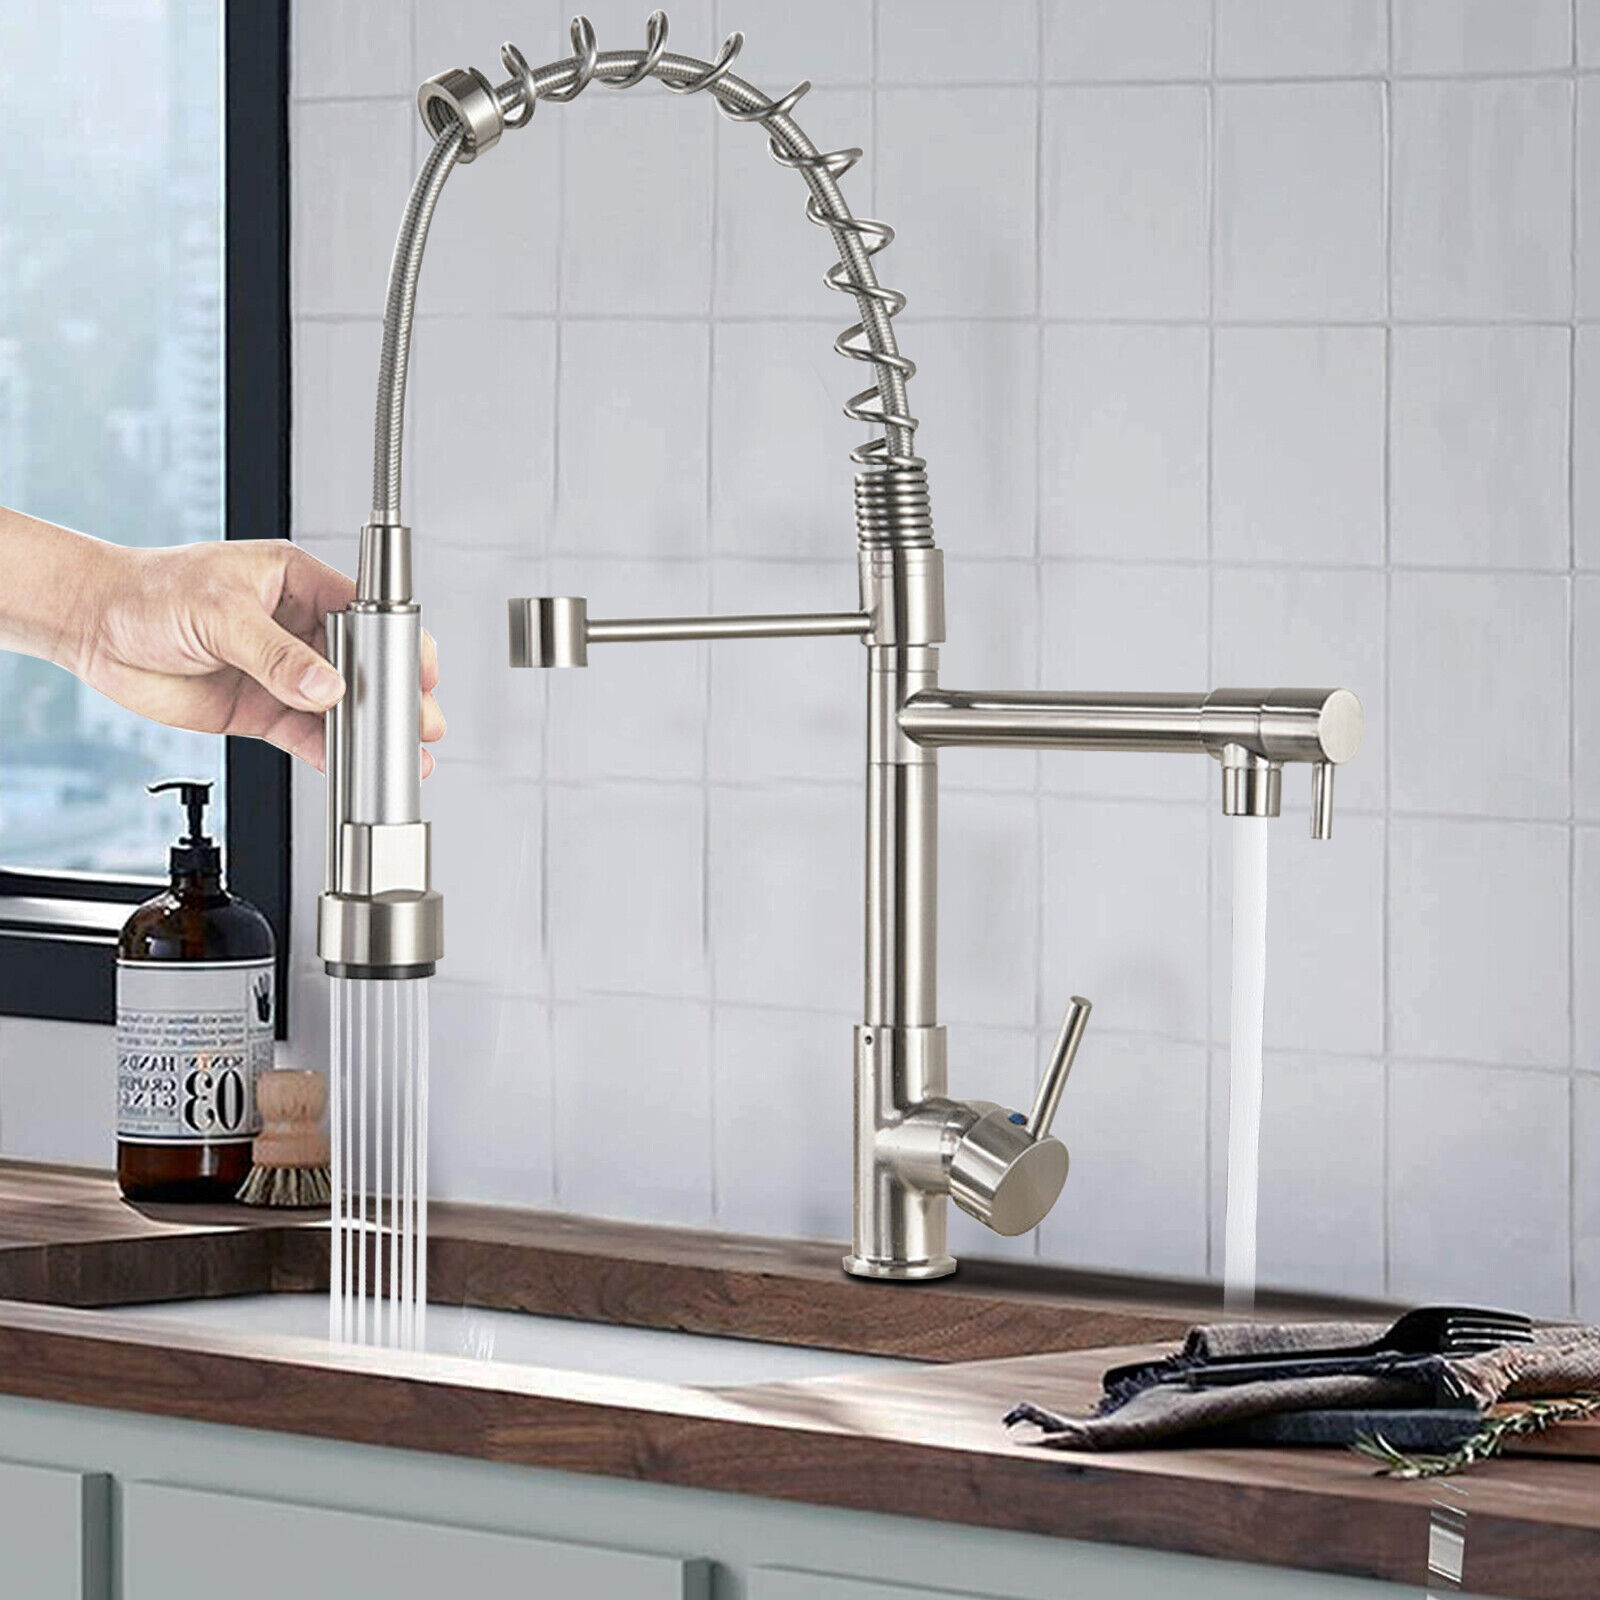 How To Replace A Kitchen Sink Faucet